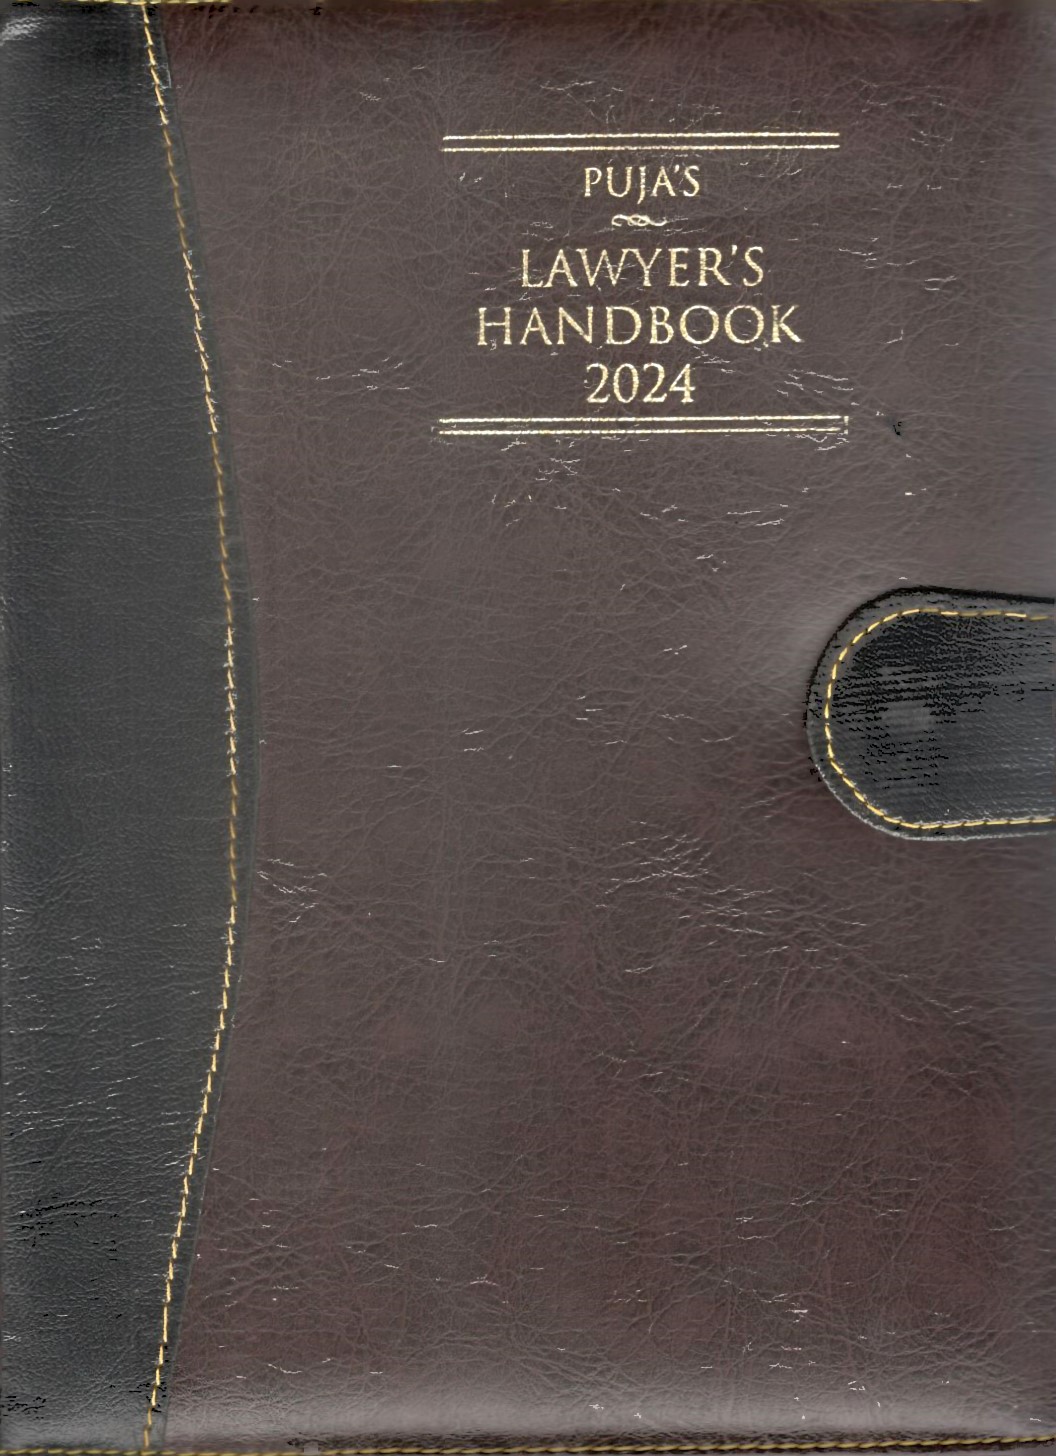 Puja’s Lawyer’s Handbook 2024 - Brown Executive Big Size with Button